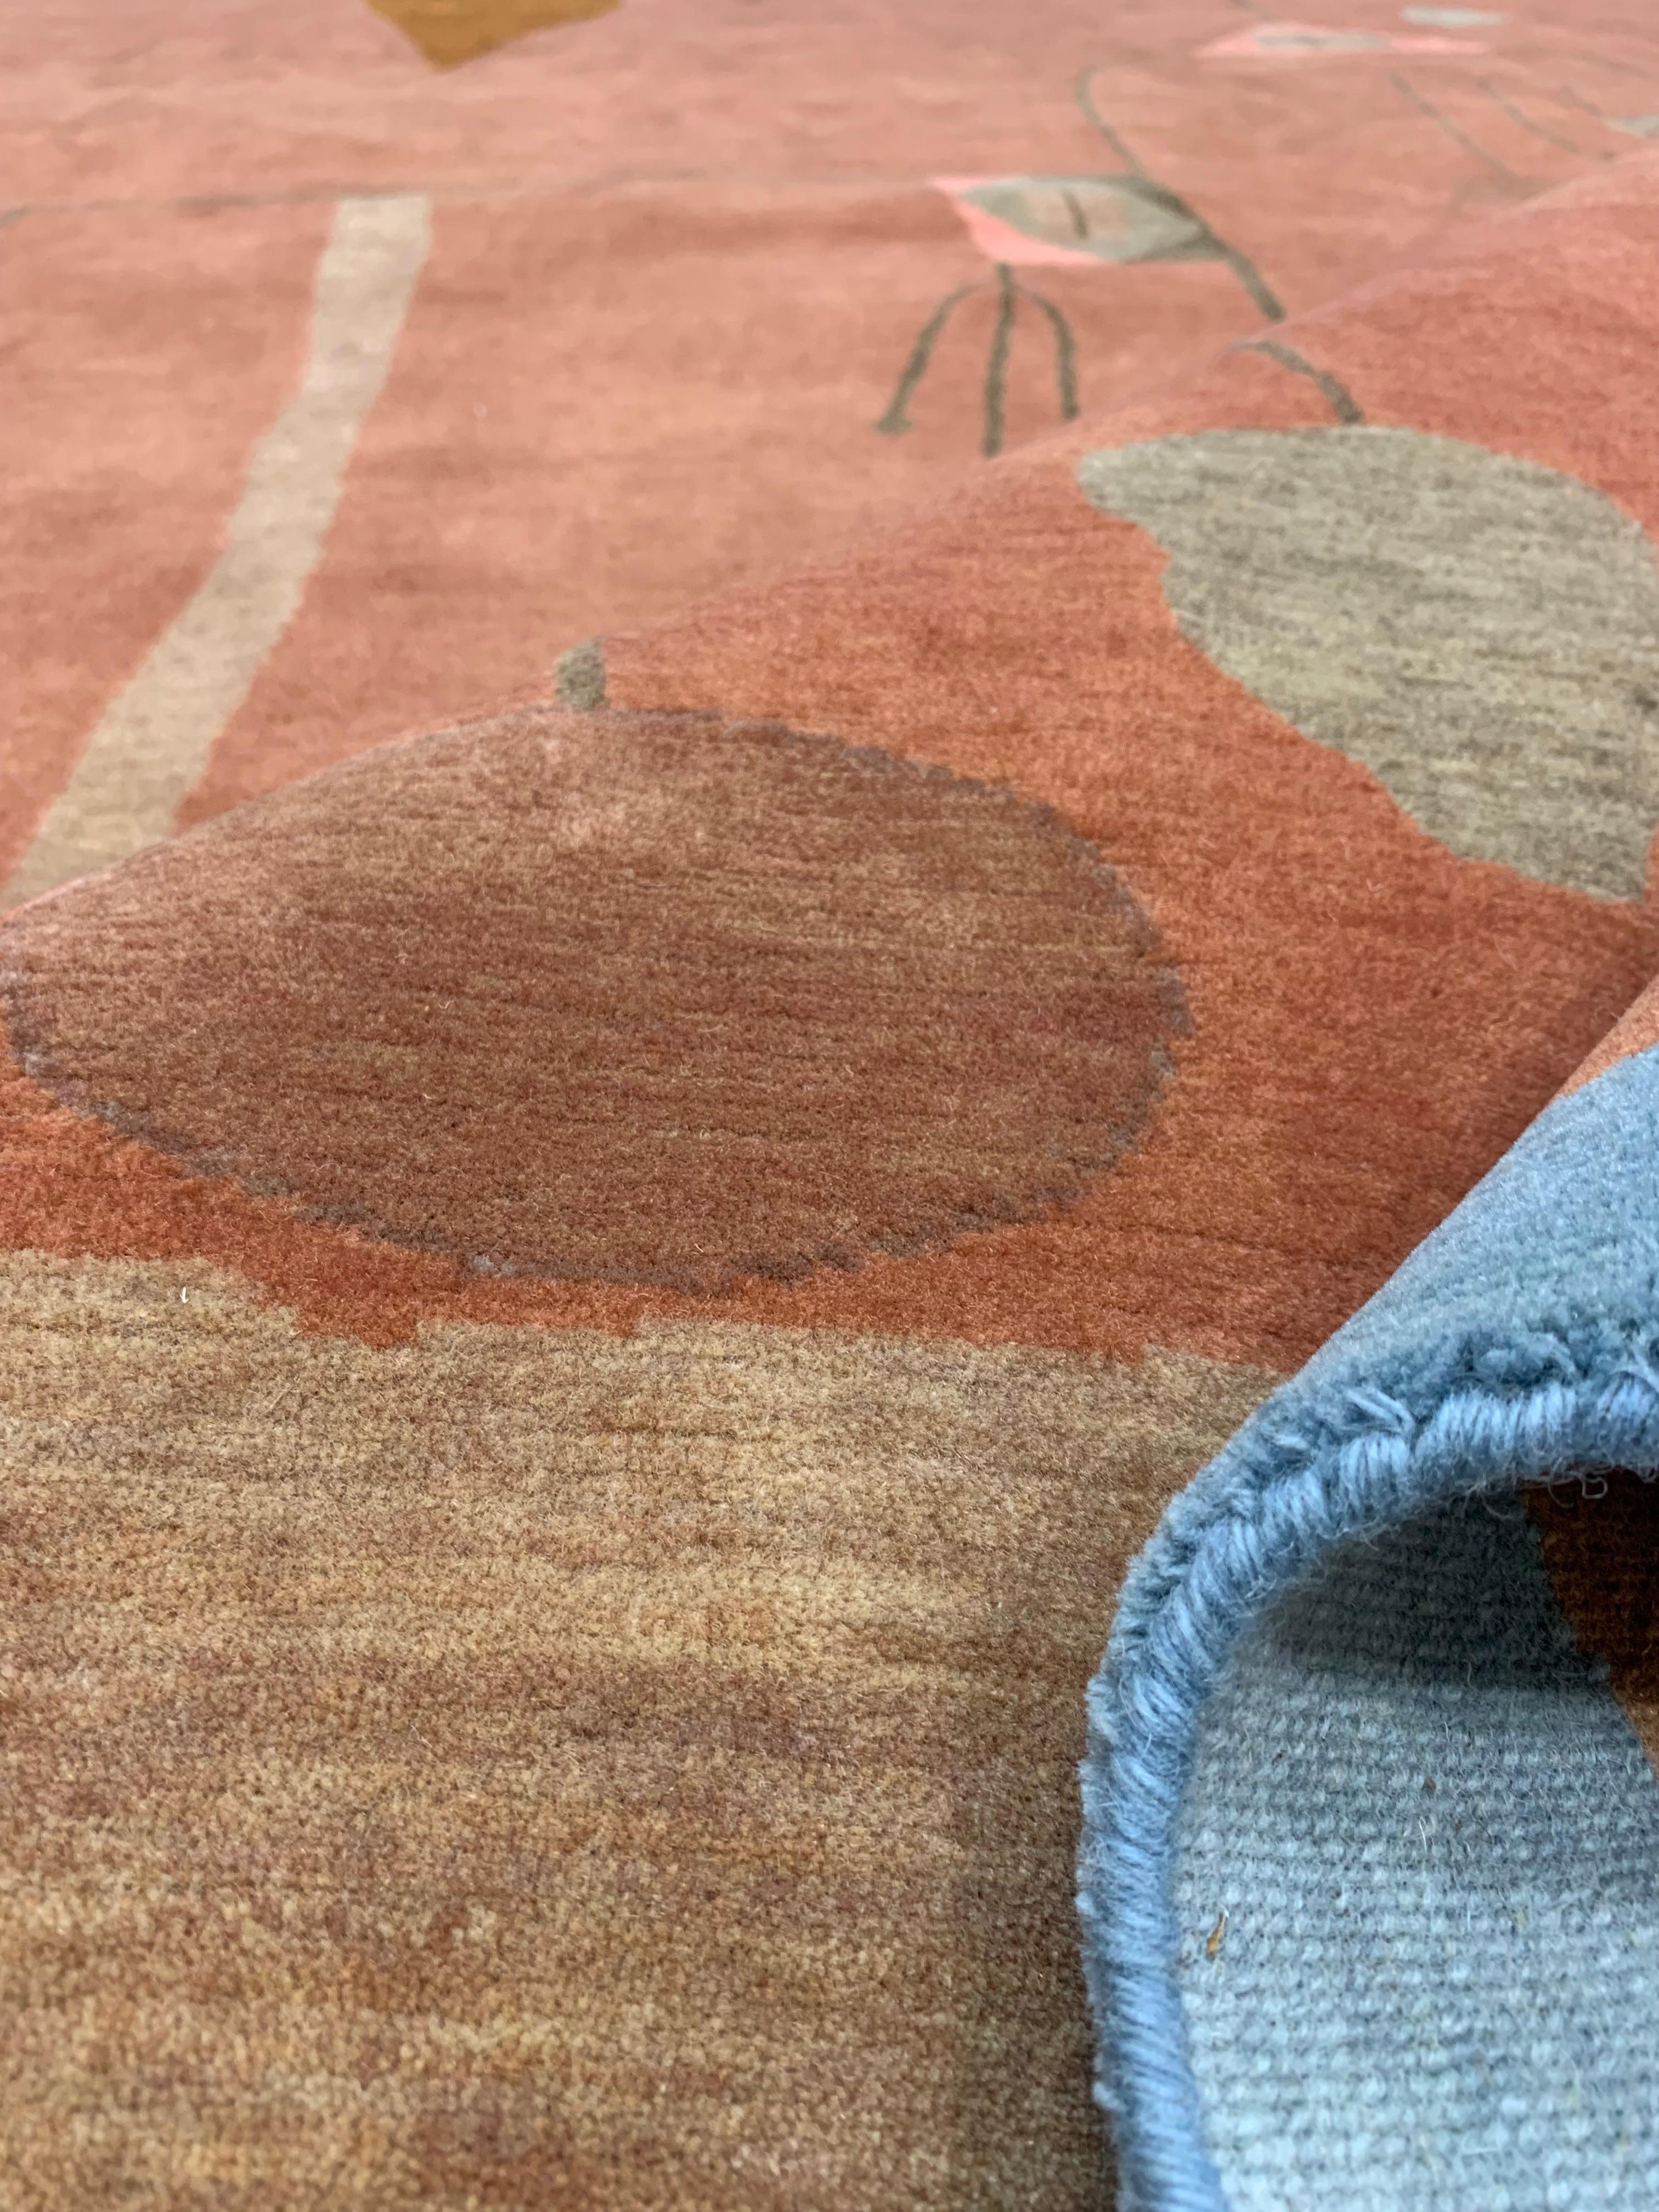 Custom hand knotted rug based on the painting “Fruits on Red” by Paul Klee.

Sustainable and certified fair-trade artisanal production. Label Step fair-trade partners. 

Colors: 13 custom-dyed colors. Main colors in the rug: sienna brown, cerulean